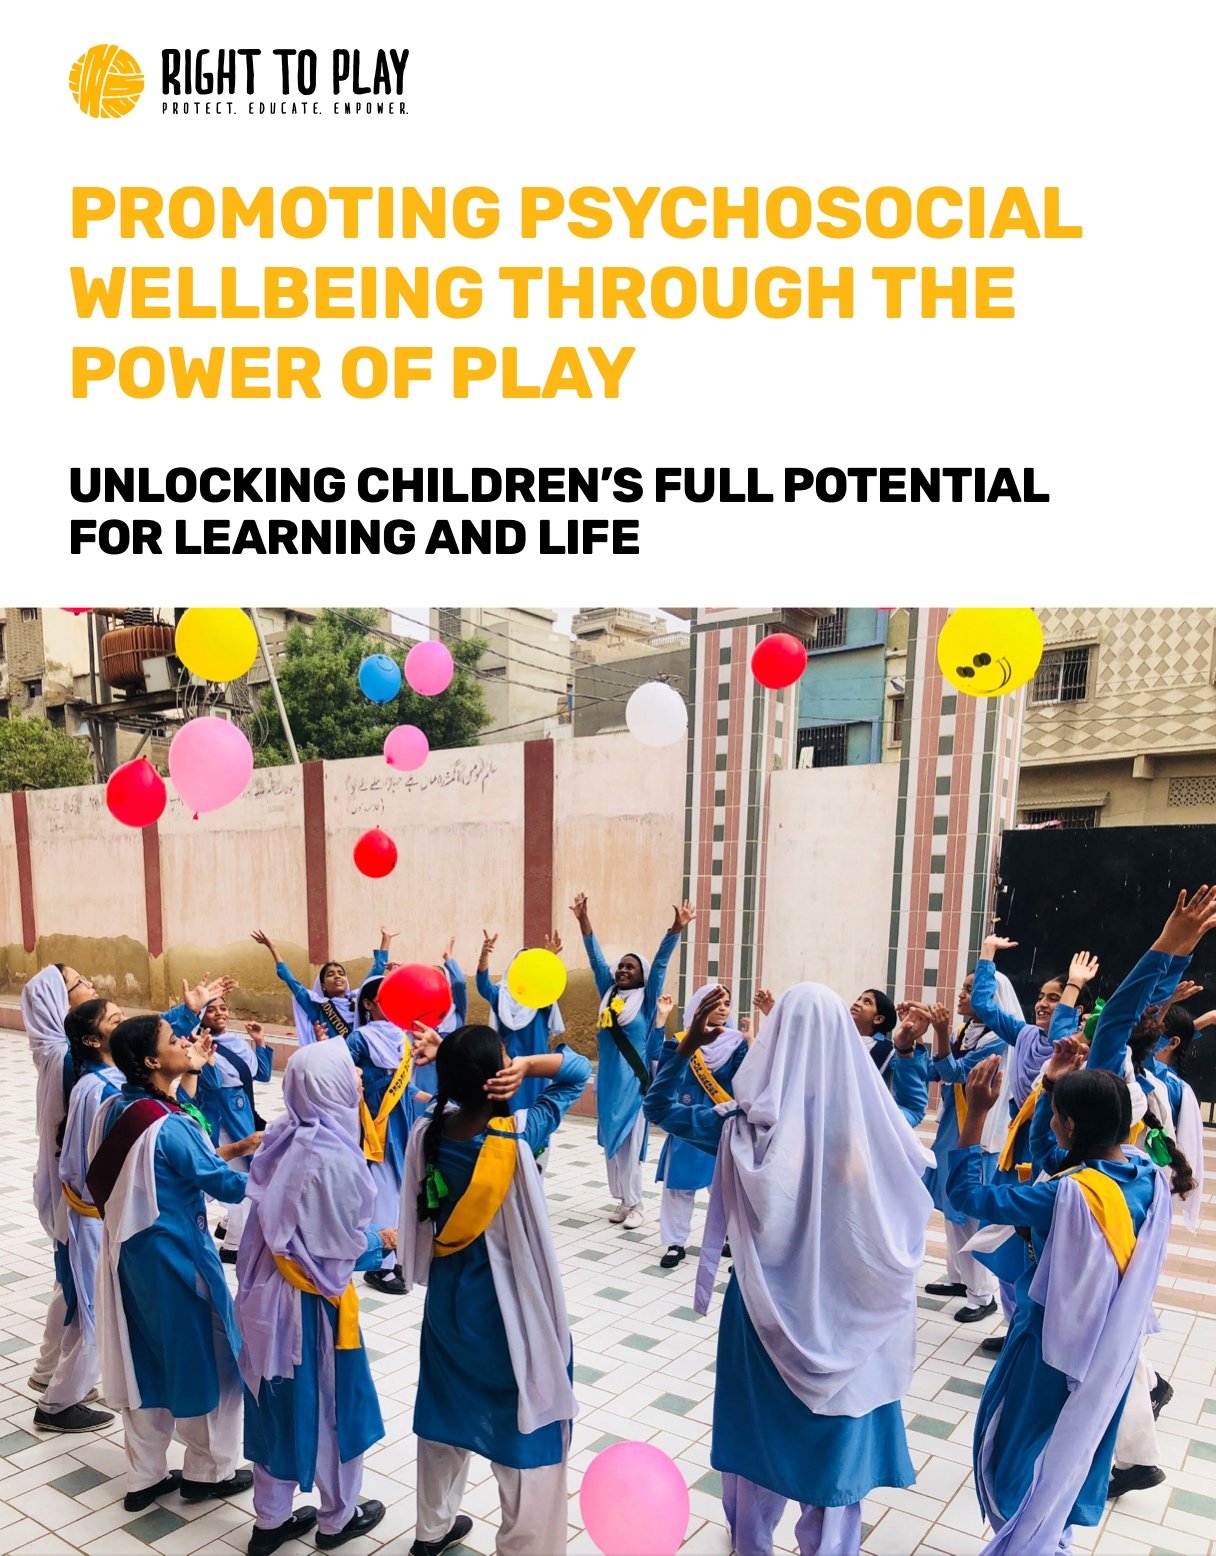 Promoting Psychosocial Wellbeing through the Power of Play